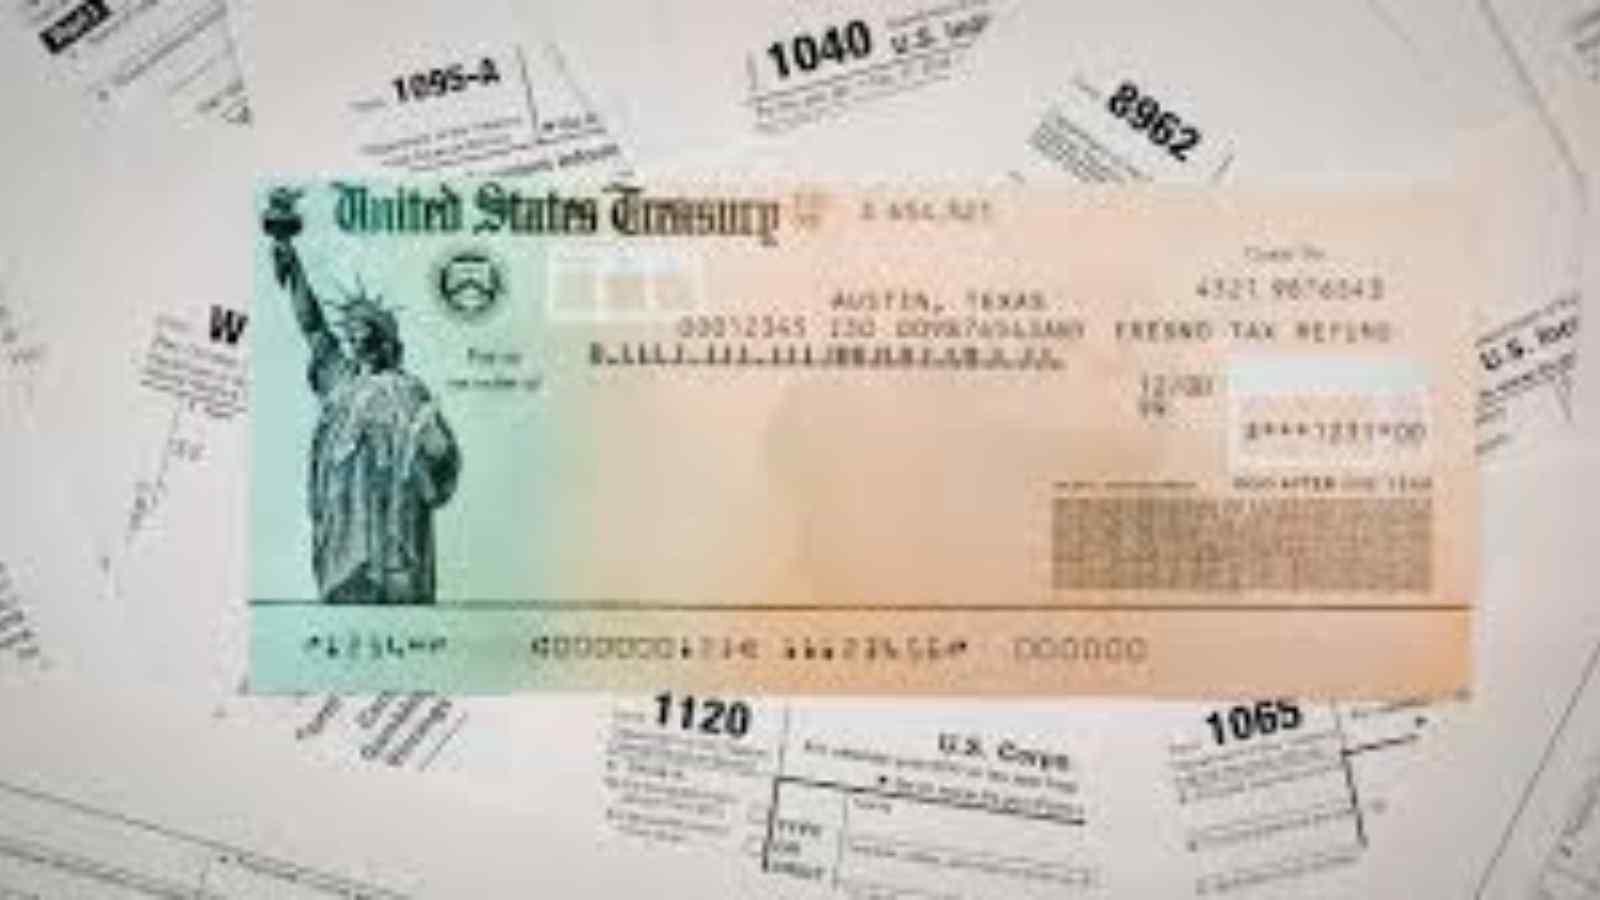 Lost State Tax Return Check